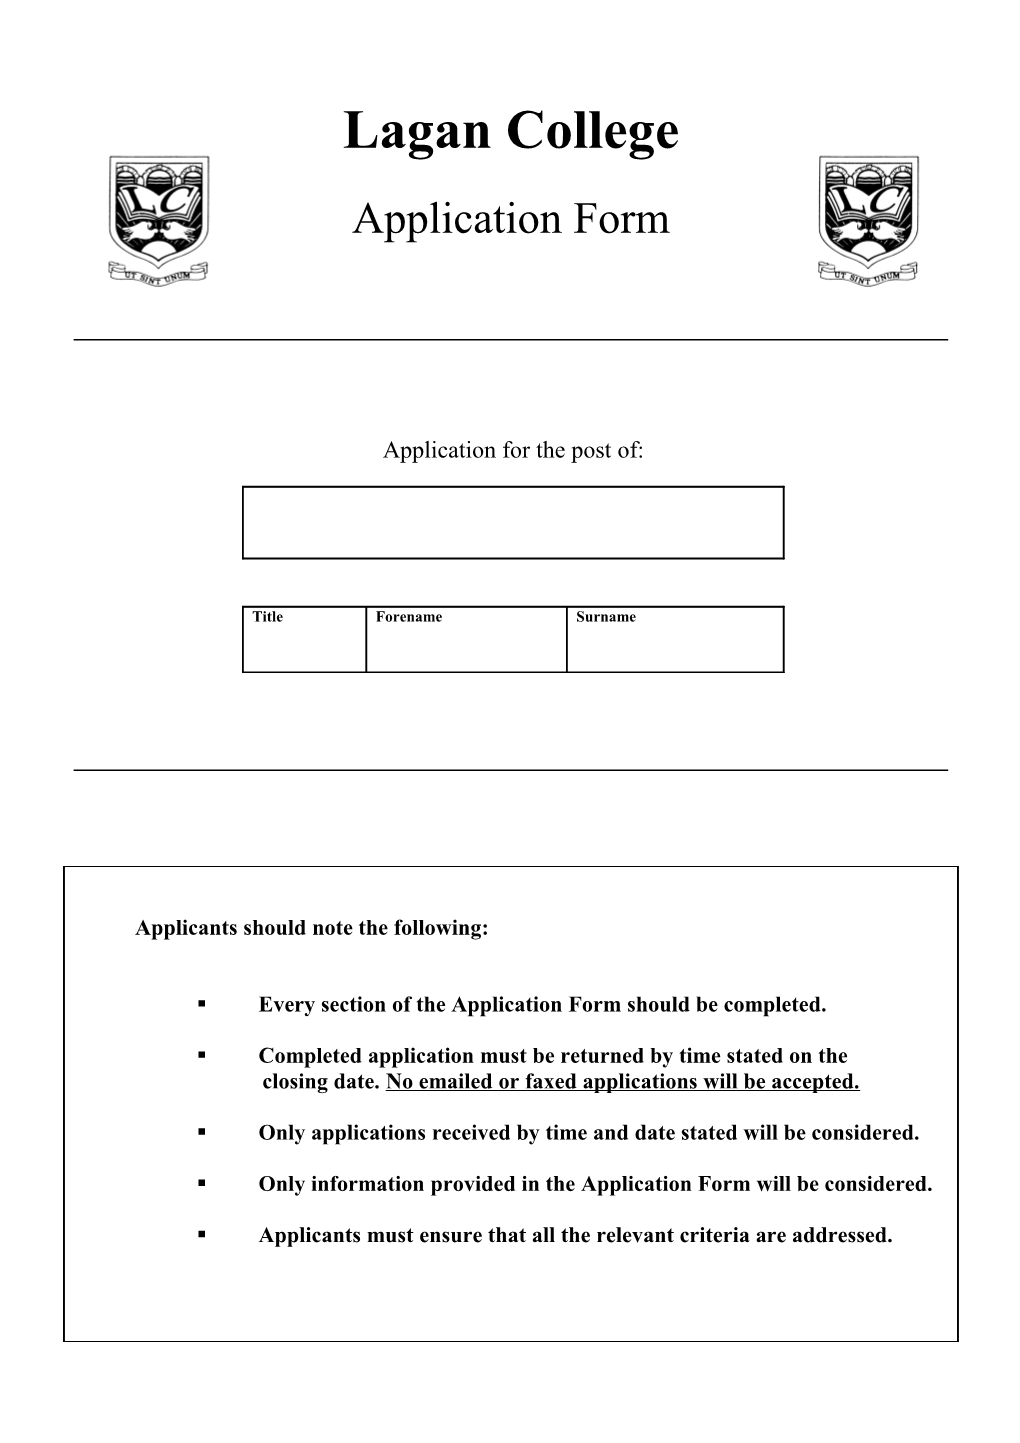 Every Section of the Application Form Should Be Completed